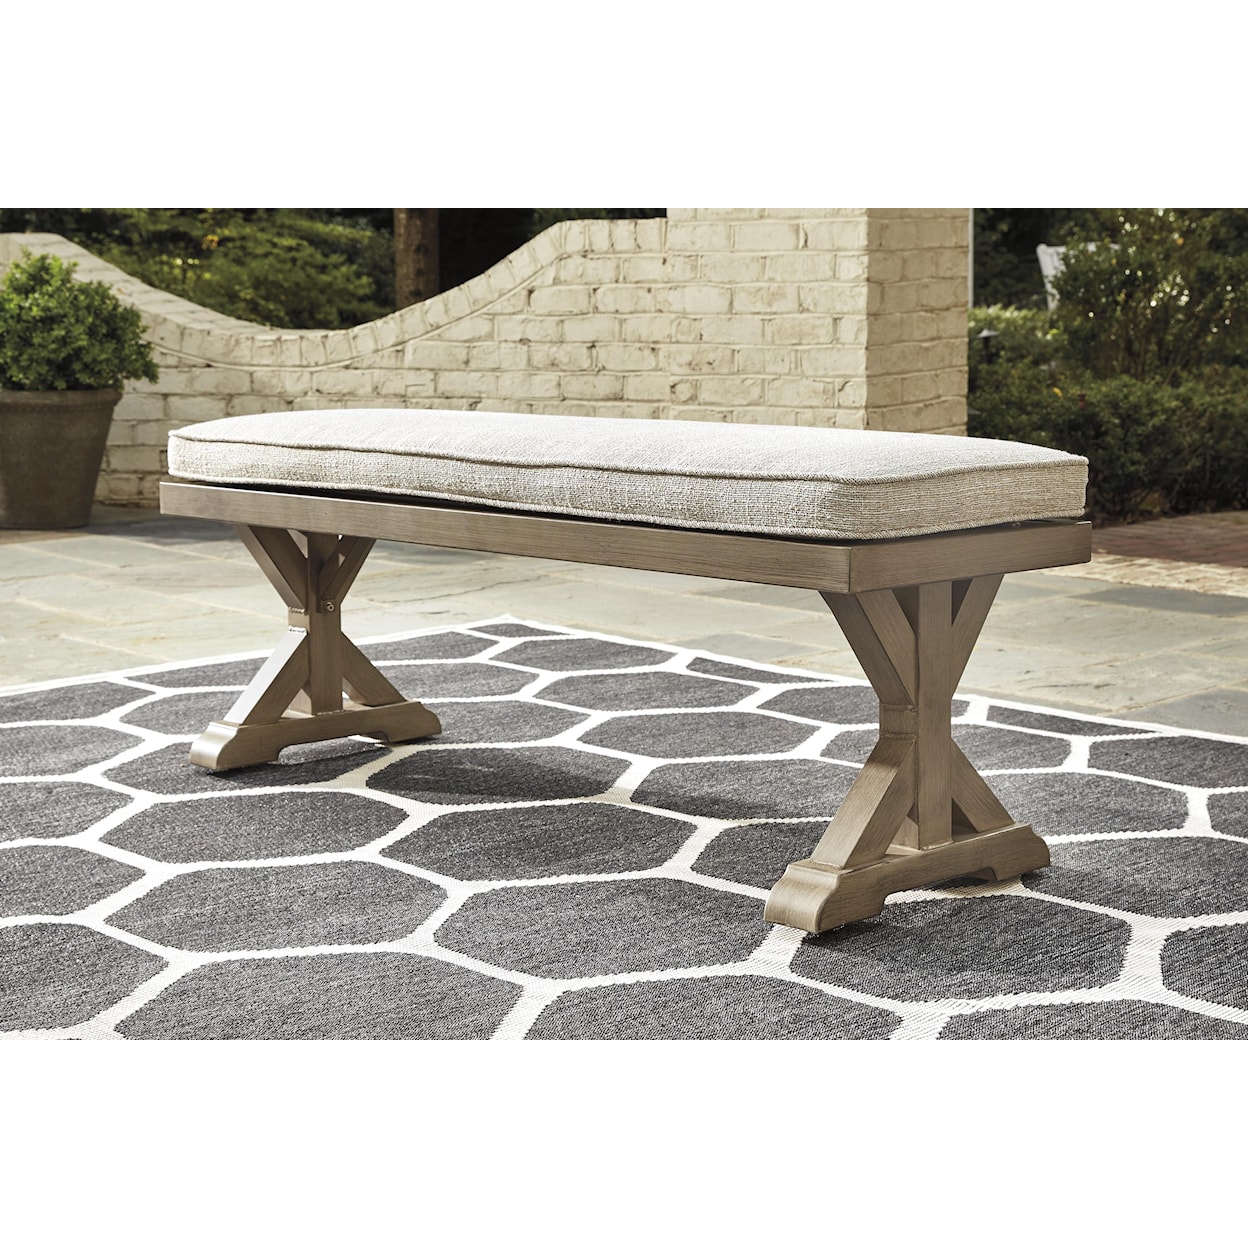 Signature Design by Ashley Beachcroft Bench with Cushion